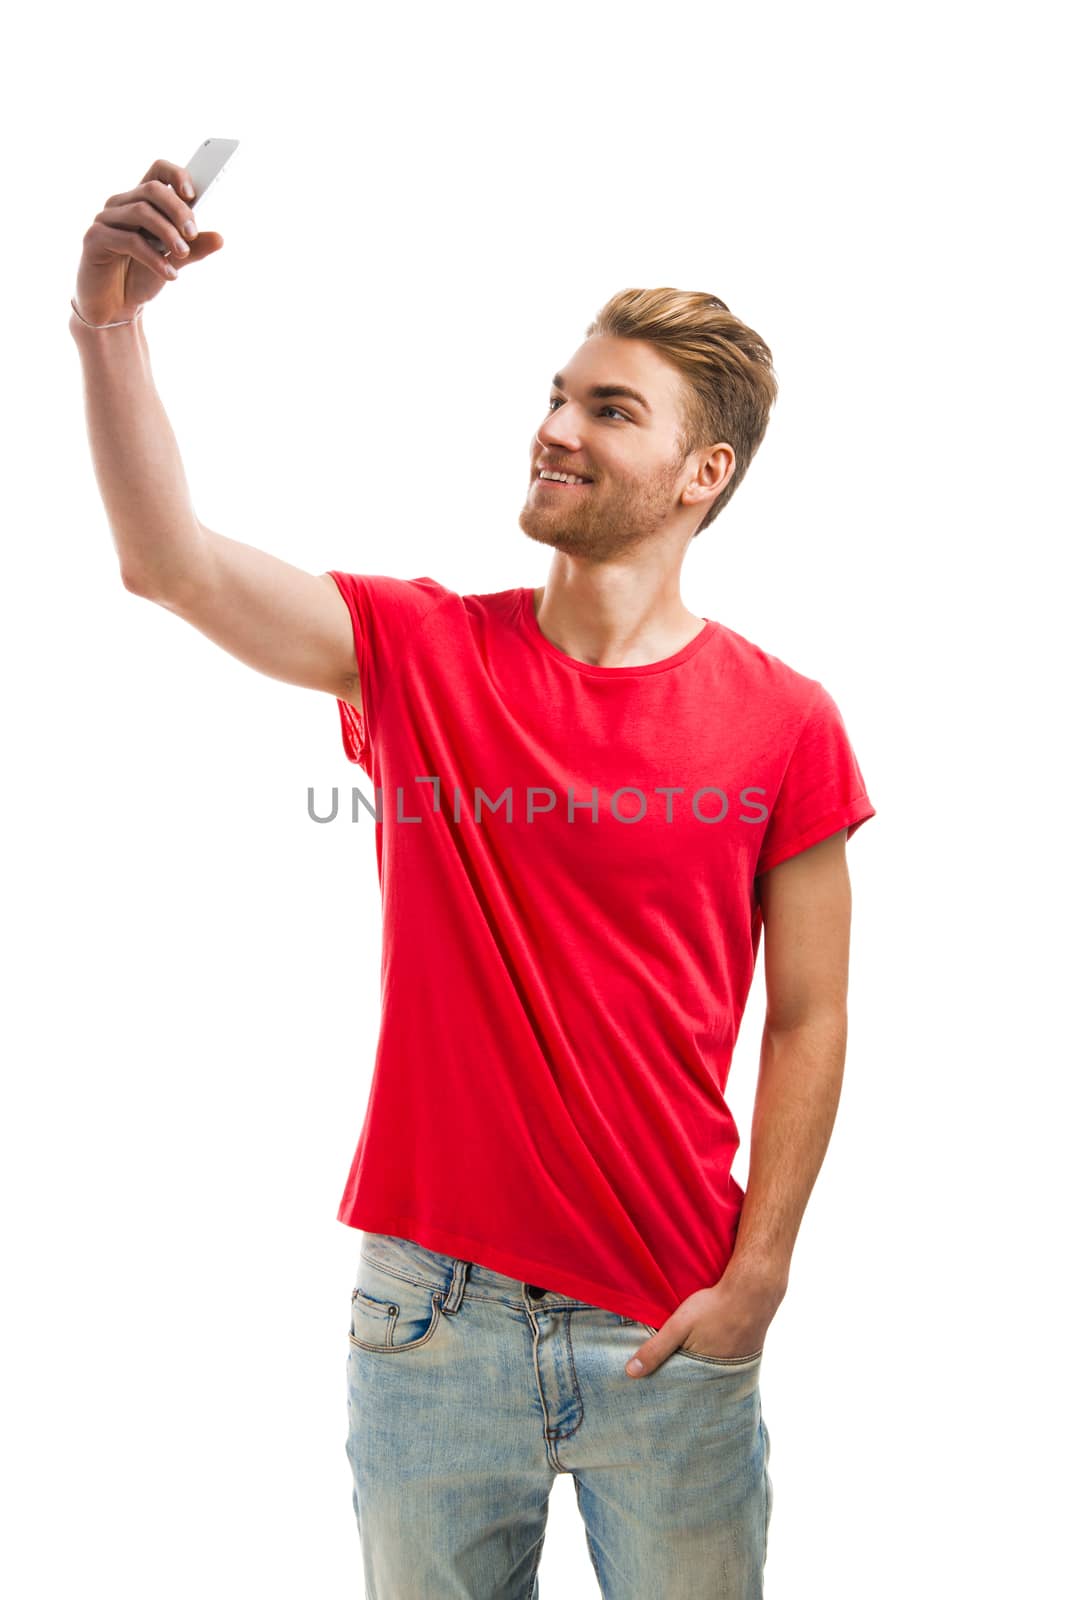 Handsome young man making a selfie, isolated over a white background